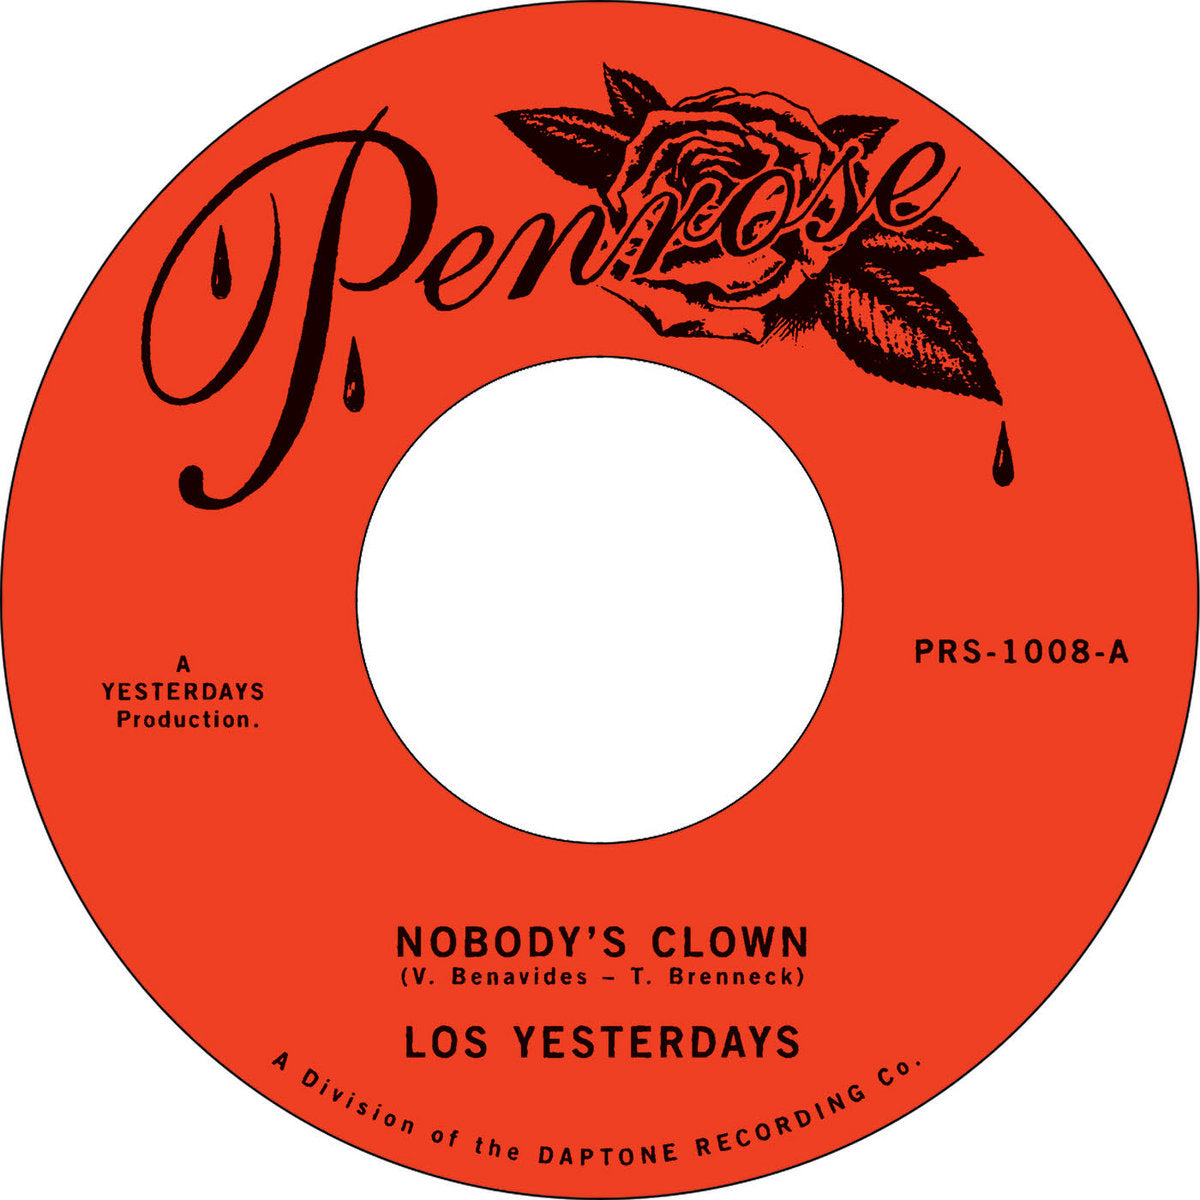 Los Yesterdays - "Nobody's Clown" / "Give Me One More Chance" 45